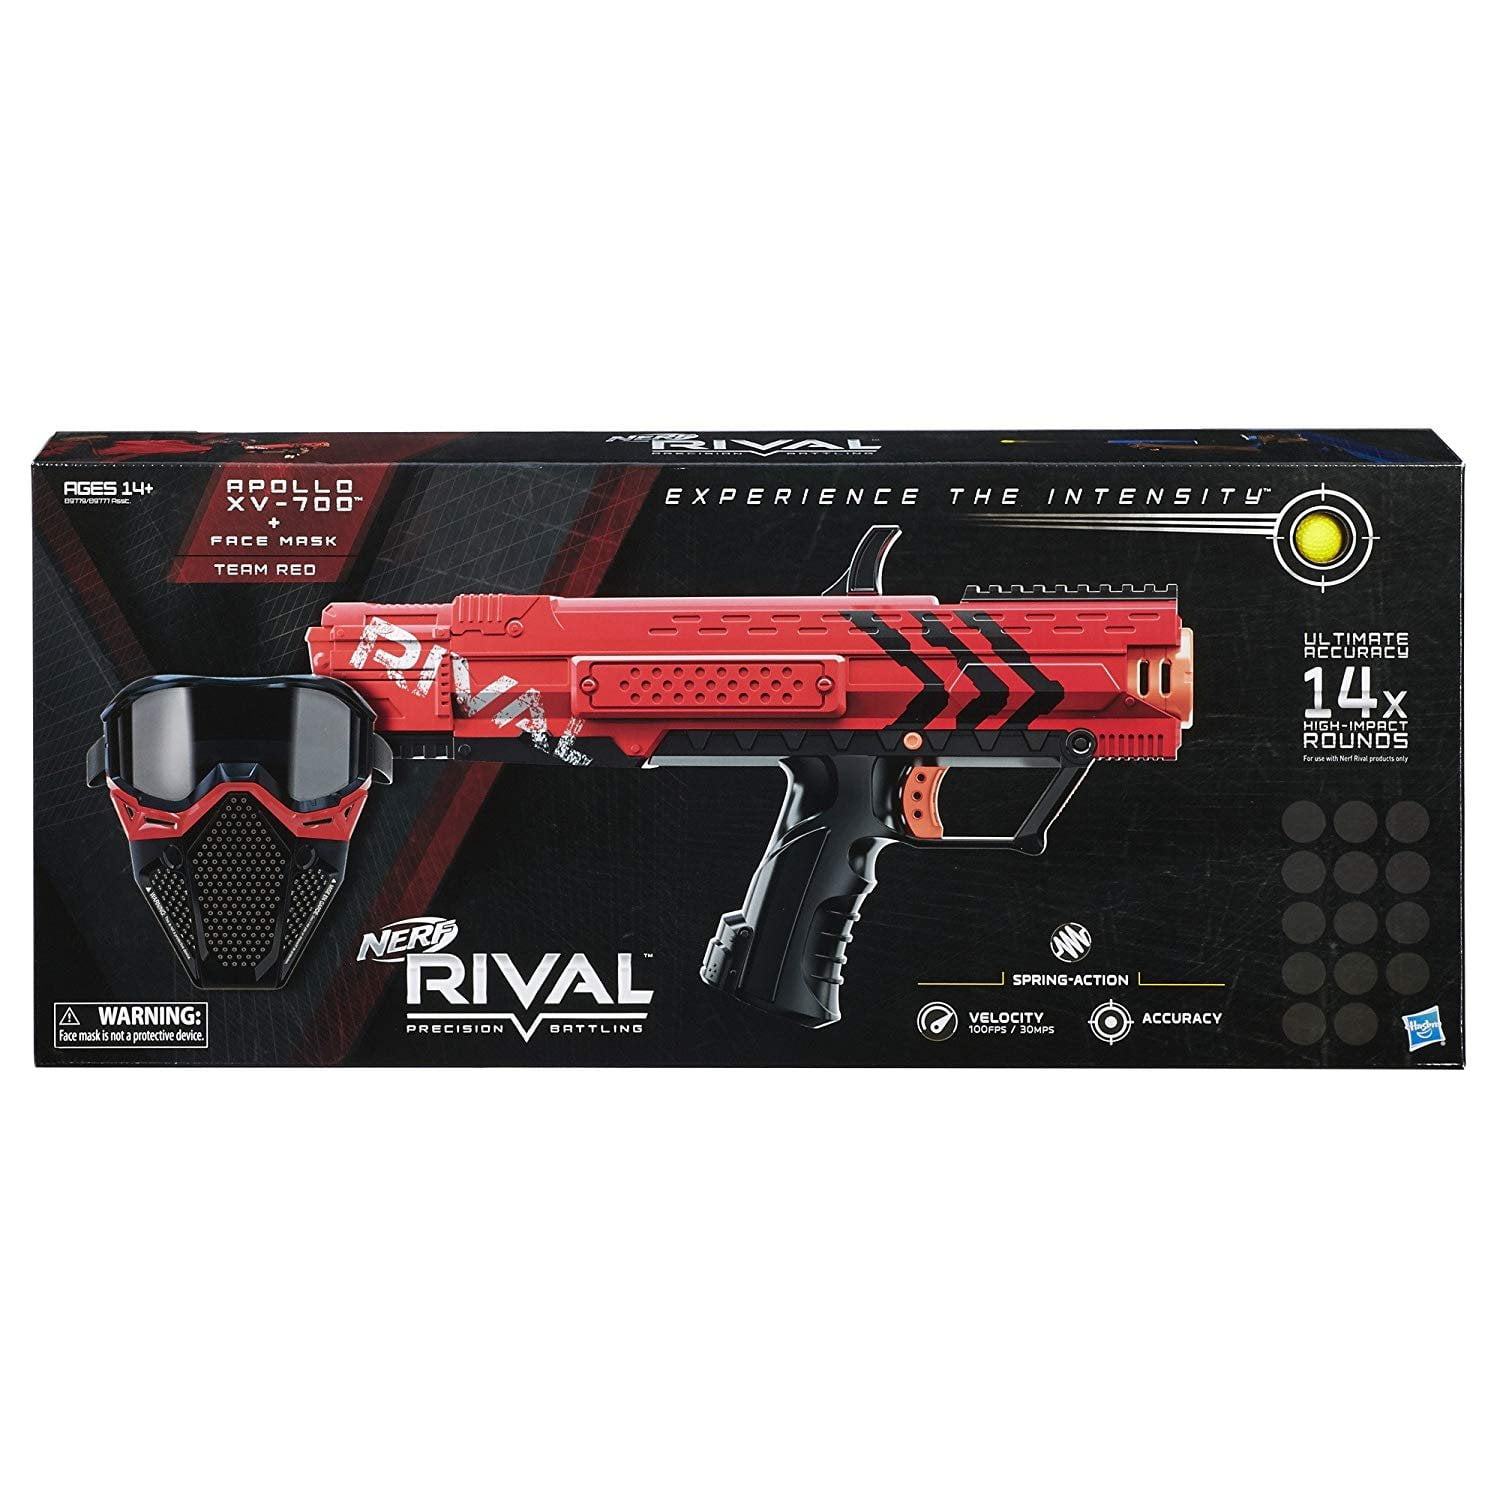 Nerf Rival Apollo XV-700 & Face Mask Team Red Blaster 14 PLUS 25 Nerf Rounds NEW 